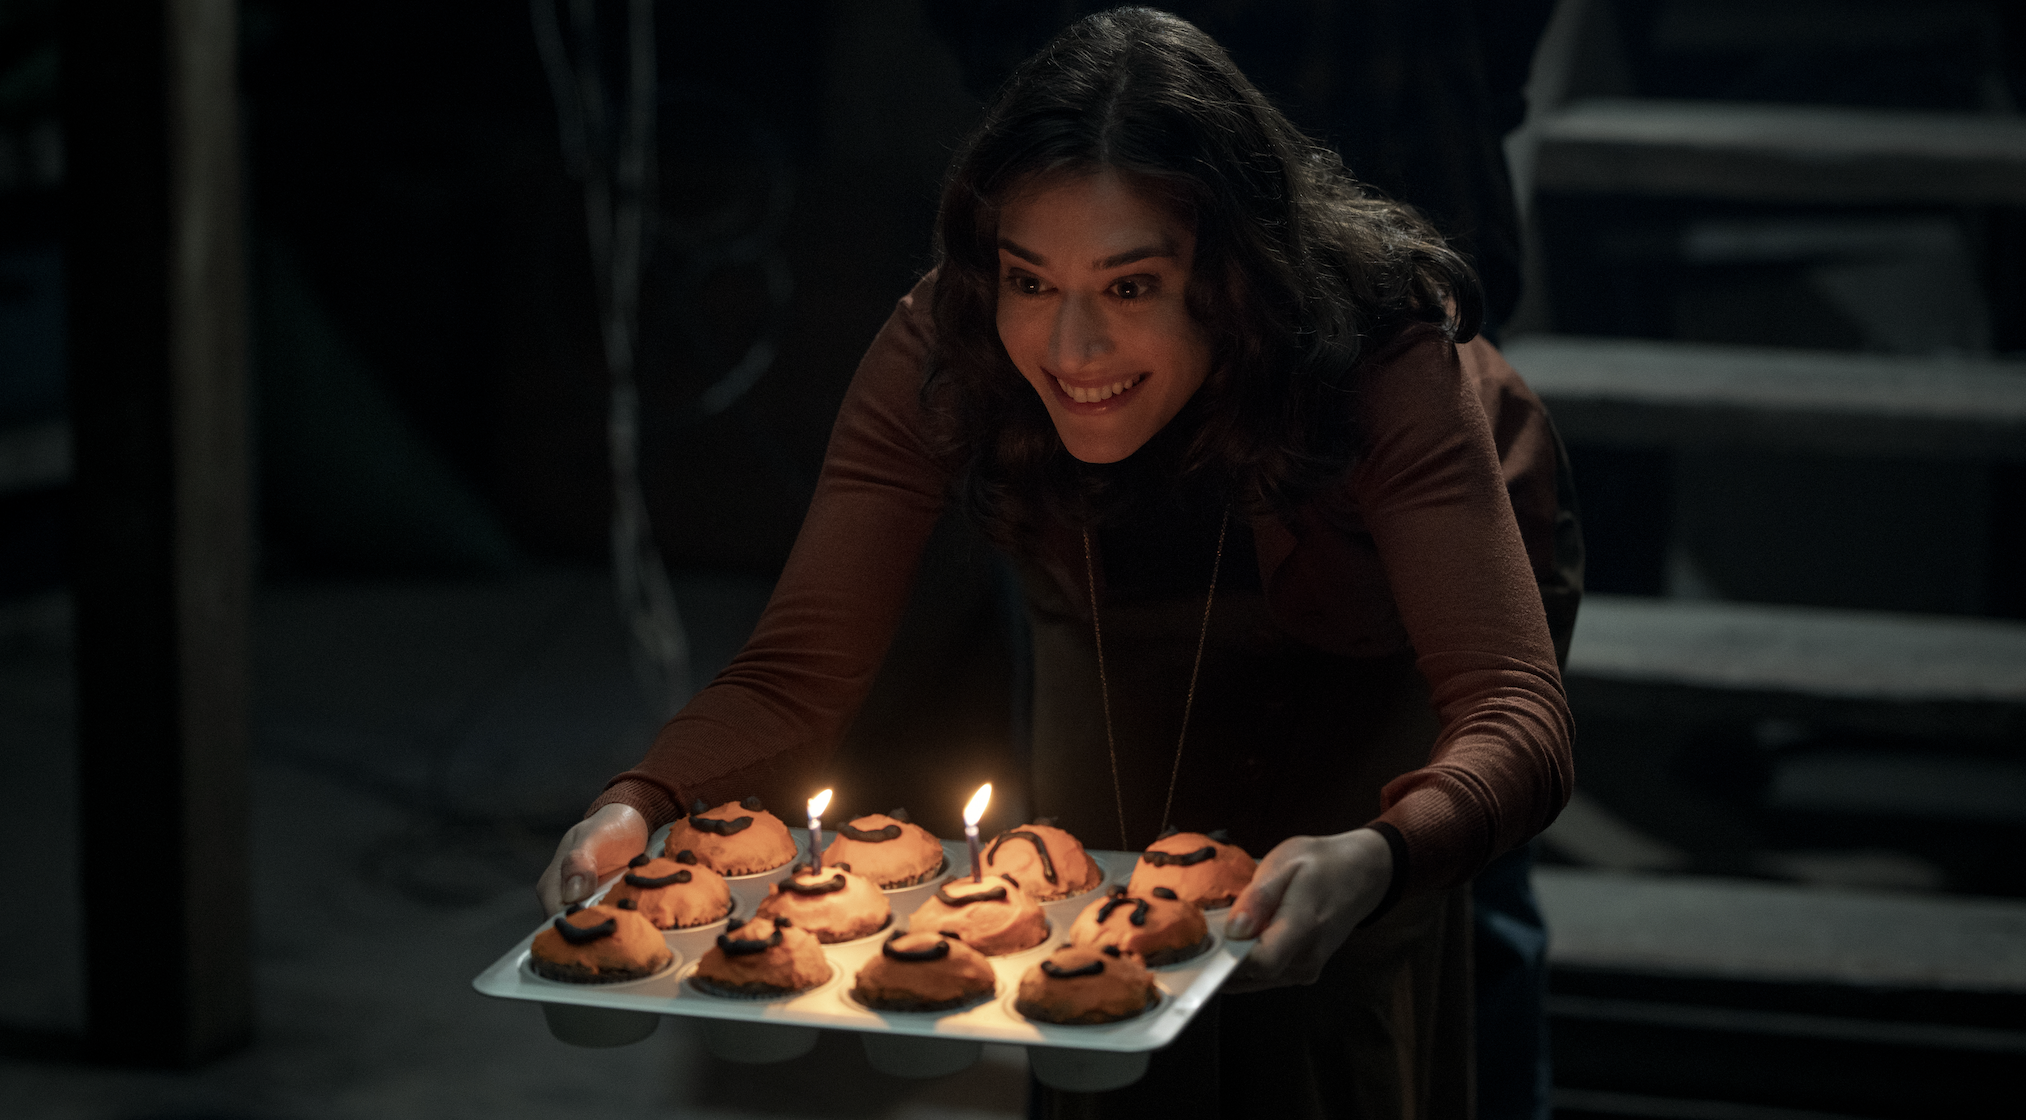 A woman holds a tray of cupcakes